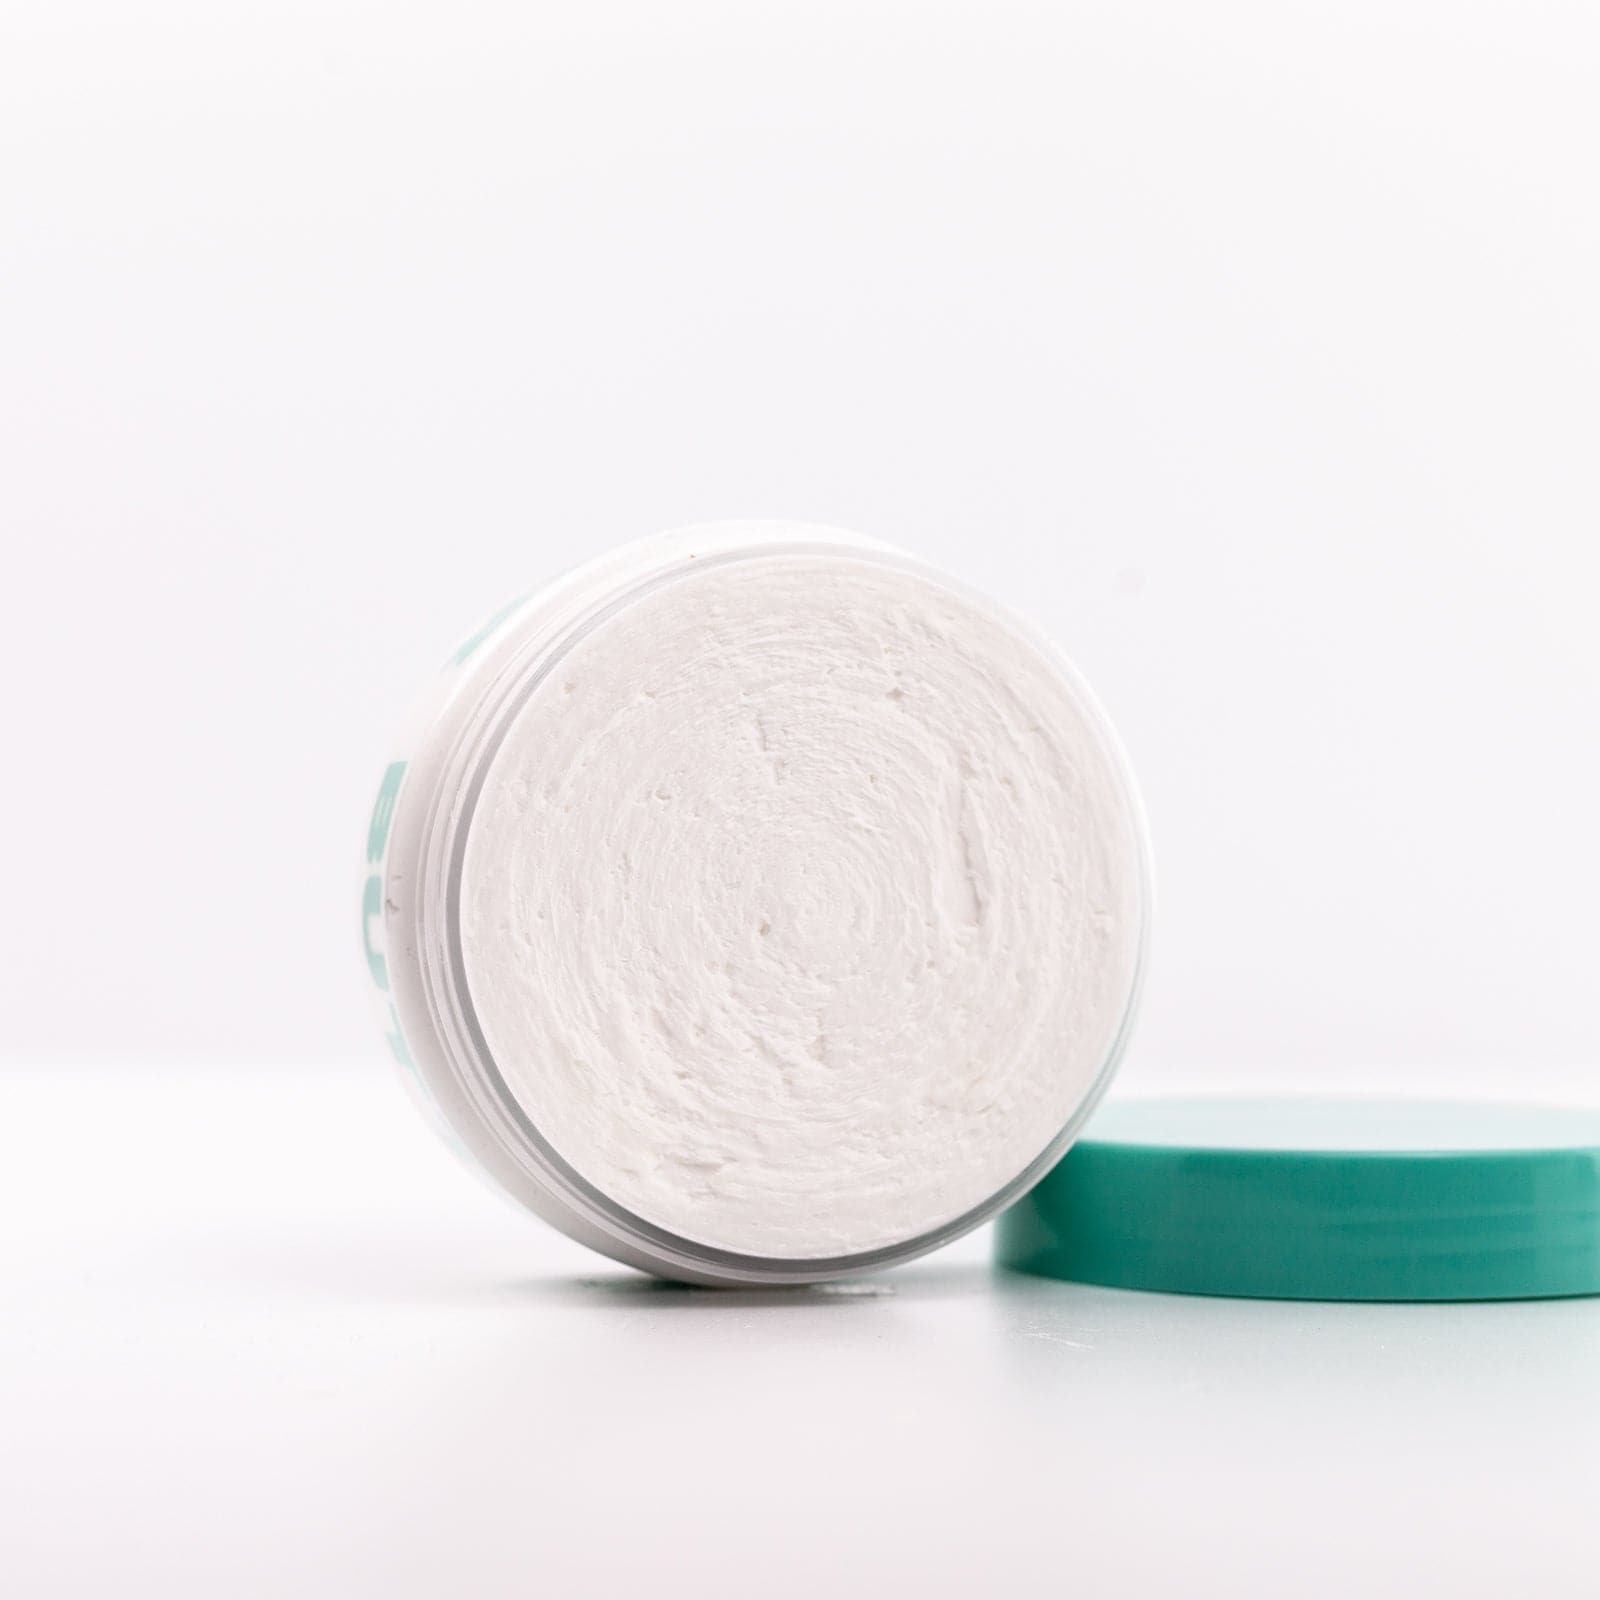 Open container of Body Butter with teal lid on the side 